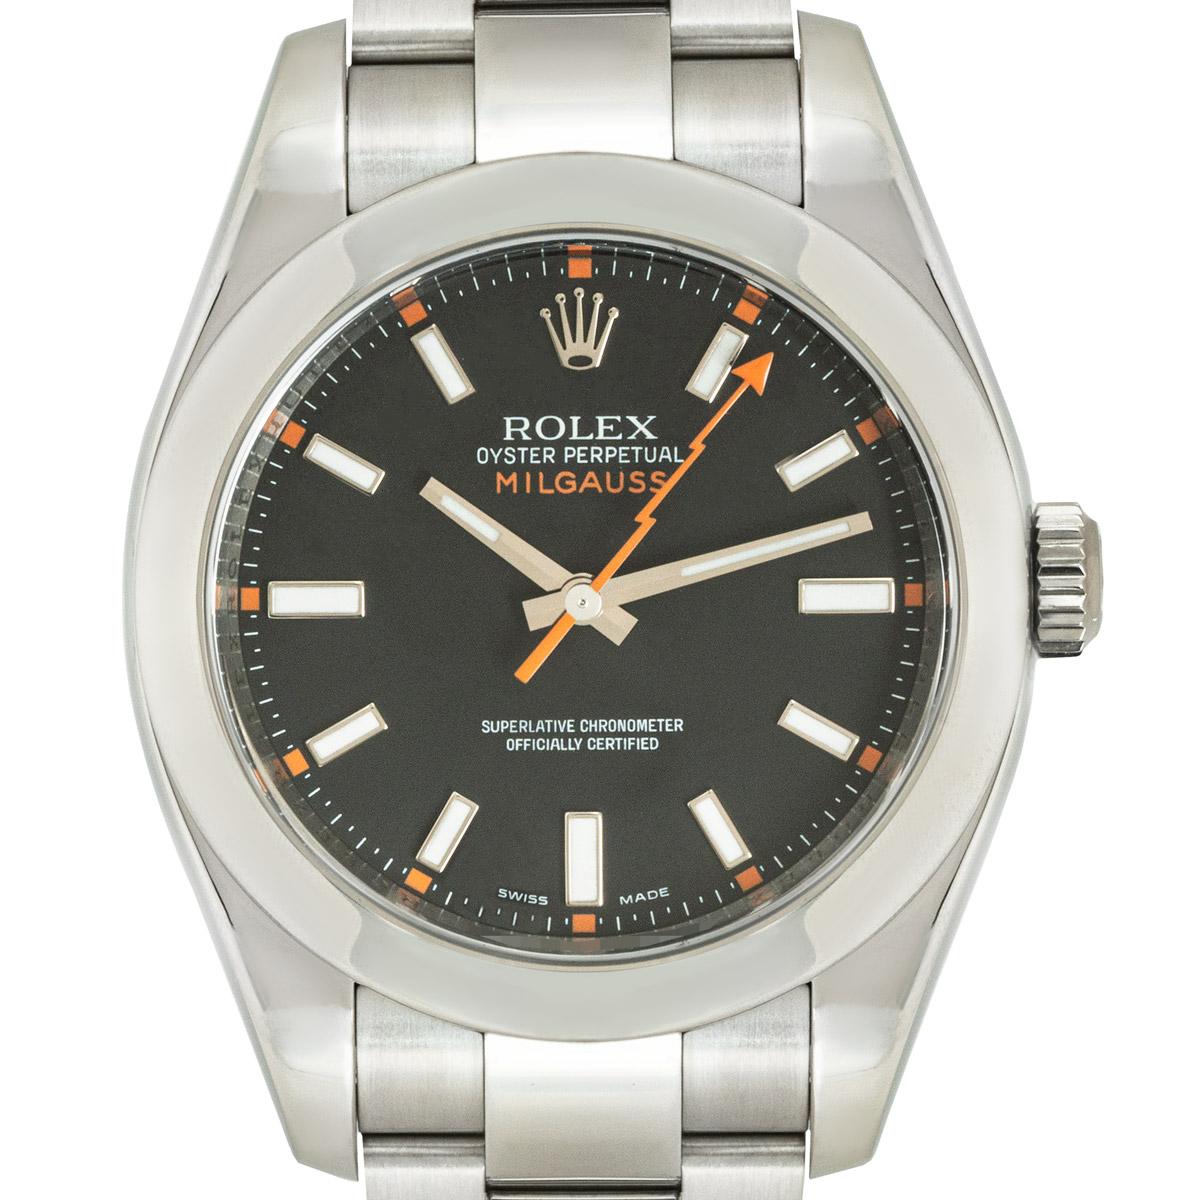 A 40mm Milgauss crafted in stainless steel from Rolex. Features a black dial with applied hour markers and an orange second hand shaped like a lightning bolt.

Fitted with a sapphire glass, a self-winding automatic movement and an Oyster bracelet